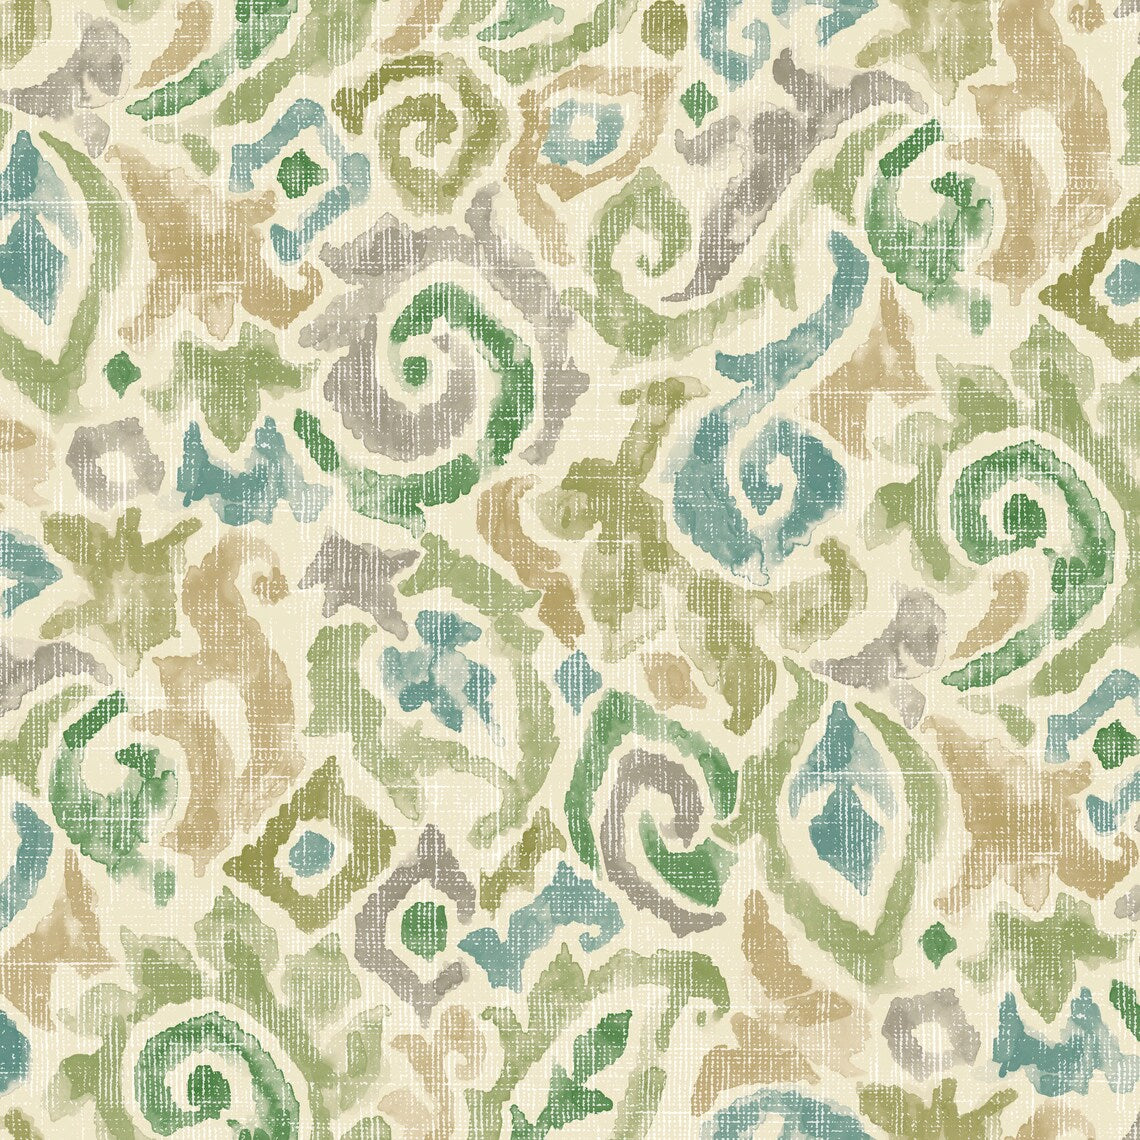 duvet cover in Jester Bay Green Paisley Watercolor